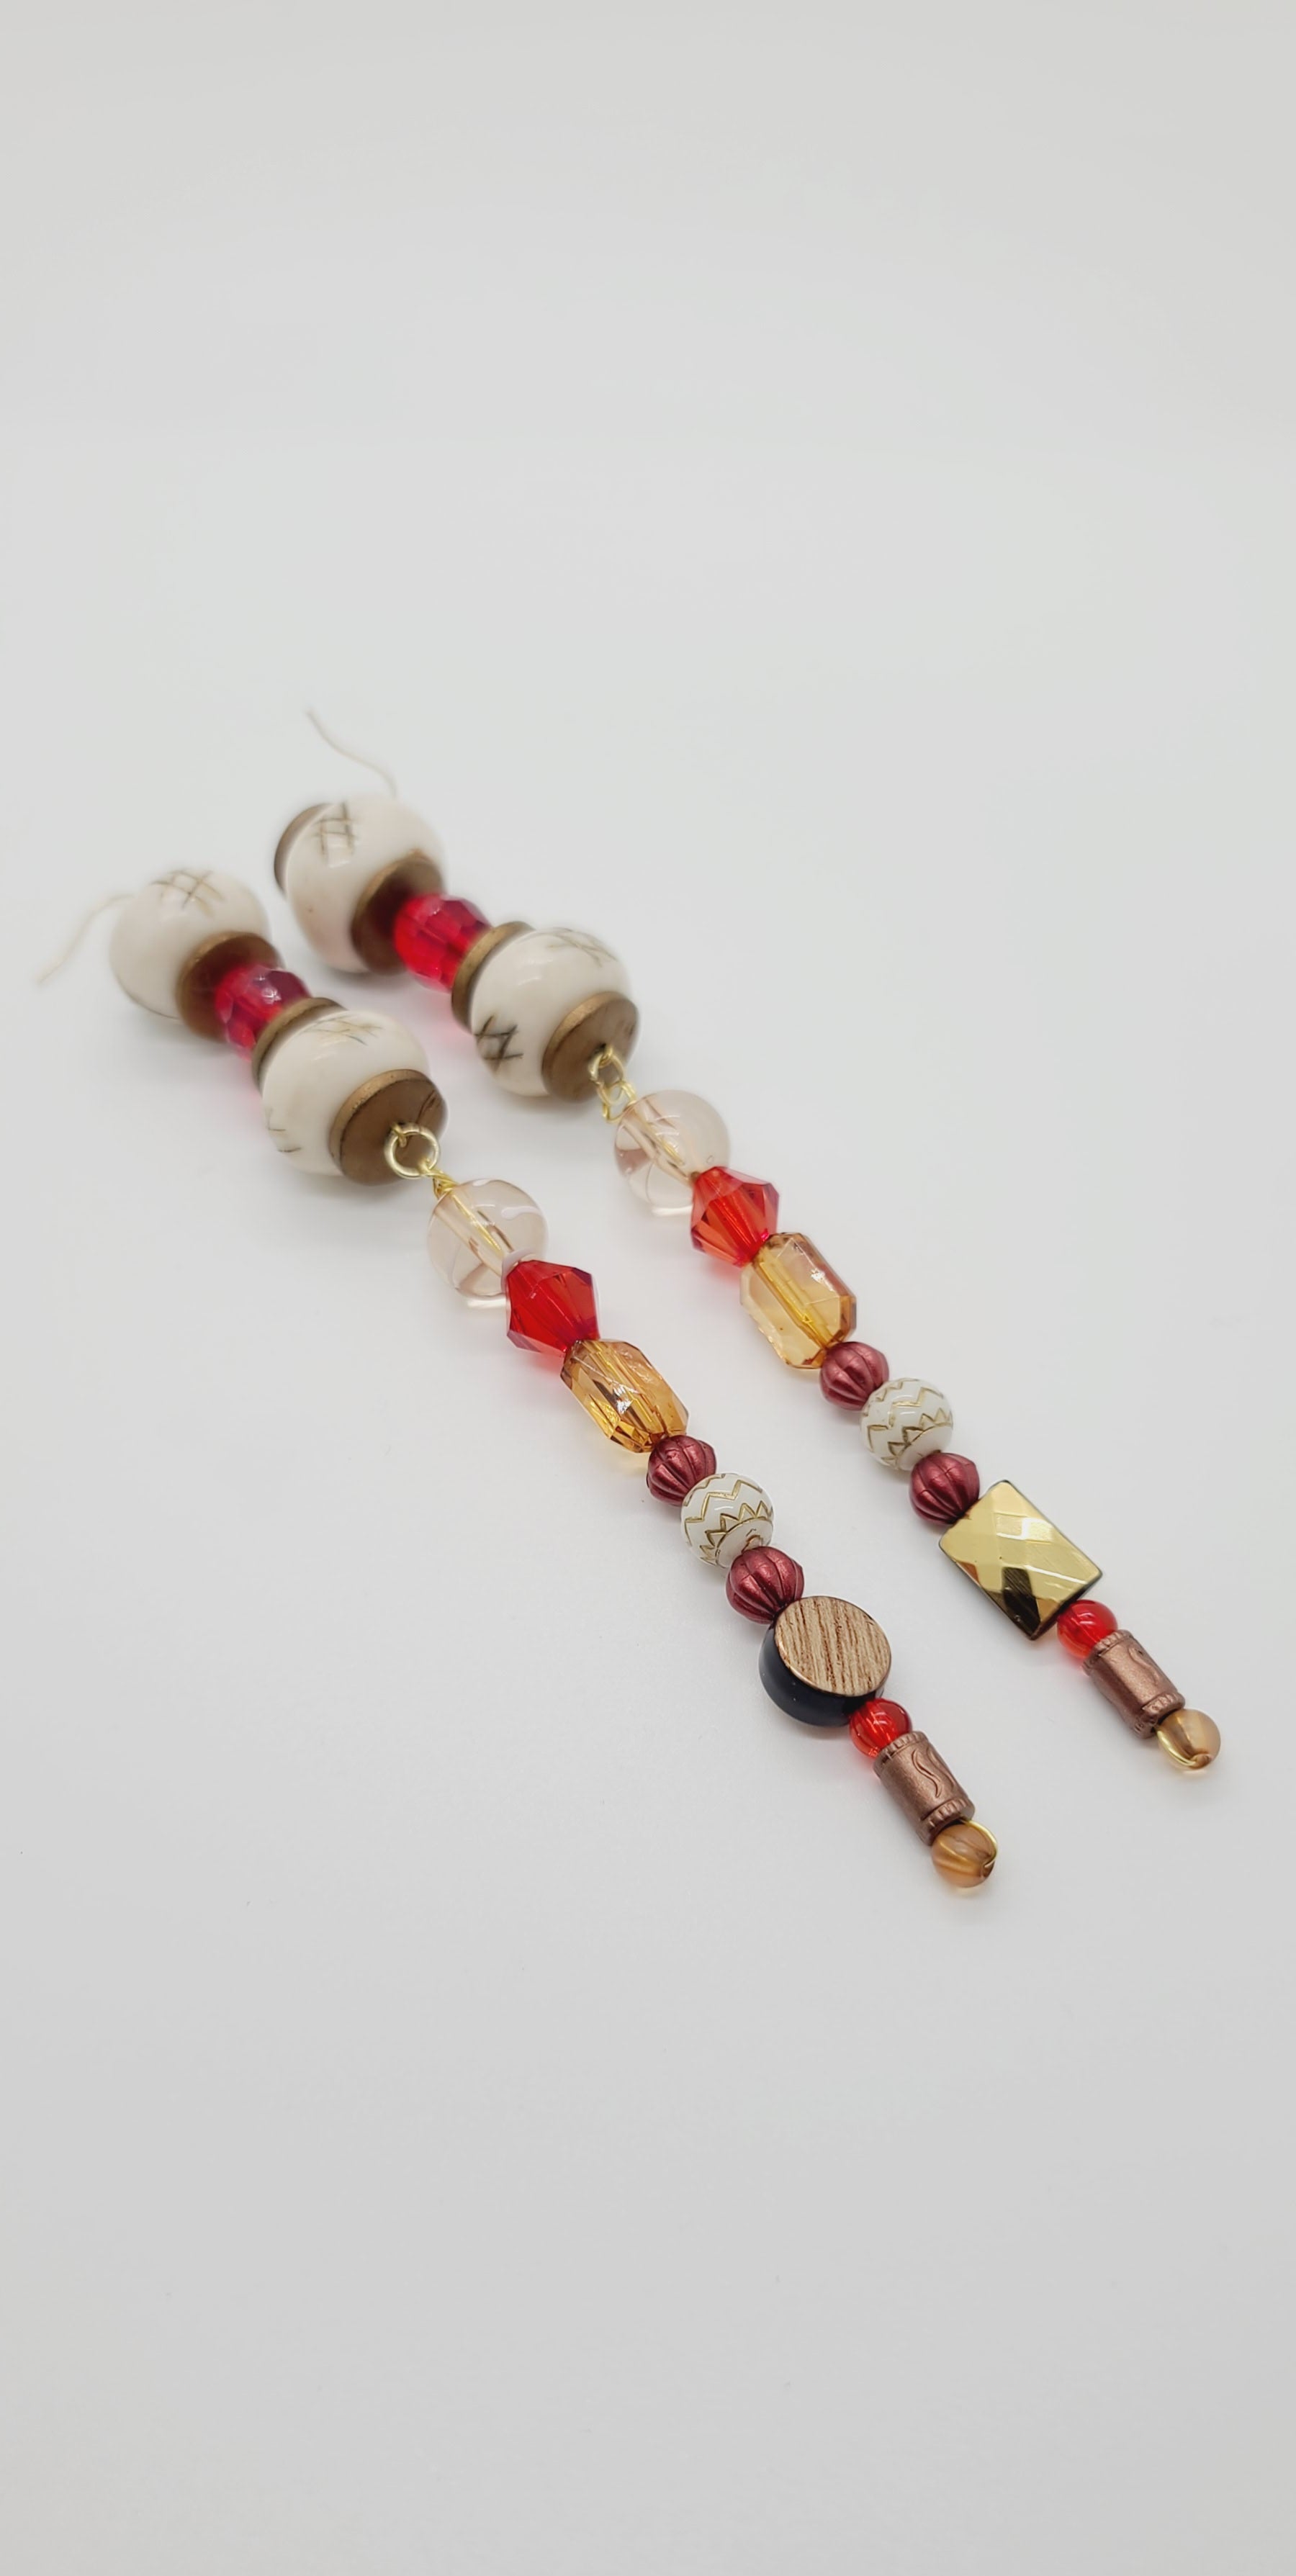 Length: 7 inches | Weight: 1.5 ounces  Distinctly You! These earrings are made with white checked Batik bone beads, gold resin rondelles, 12mm and 10mm red faceted resin beads, 12mm clear and white glass beads, 10mm clear gold emerald cut beads, 6mm copper beads, 8mm gold carved white beads, copper spacers, and 4mm red and tan beads.